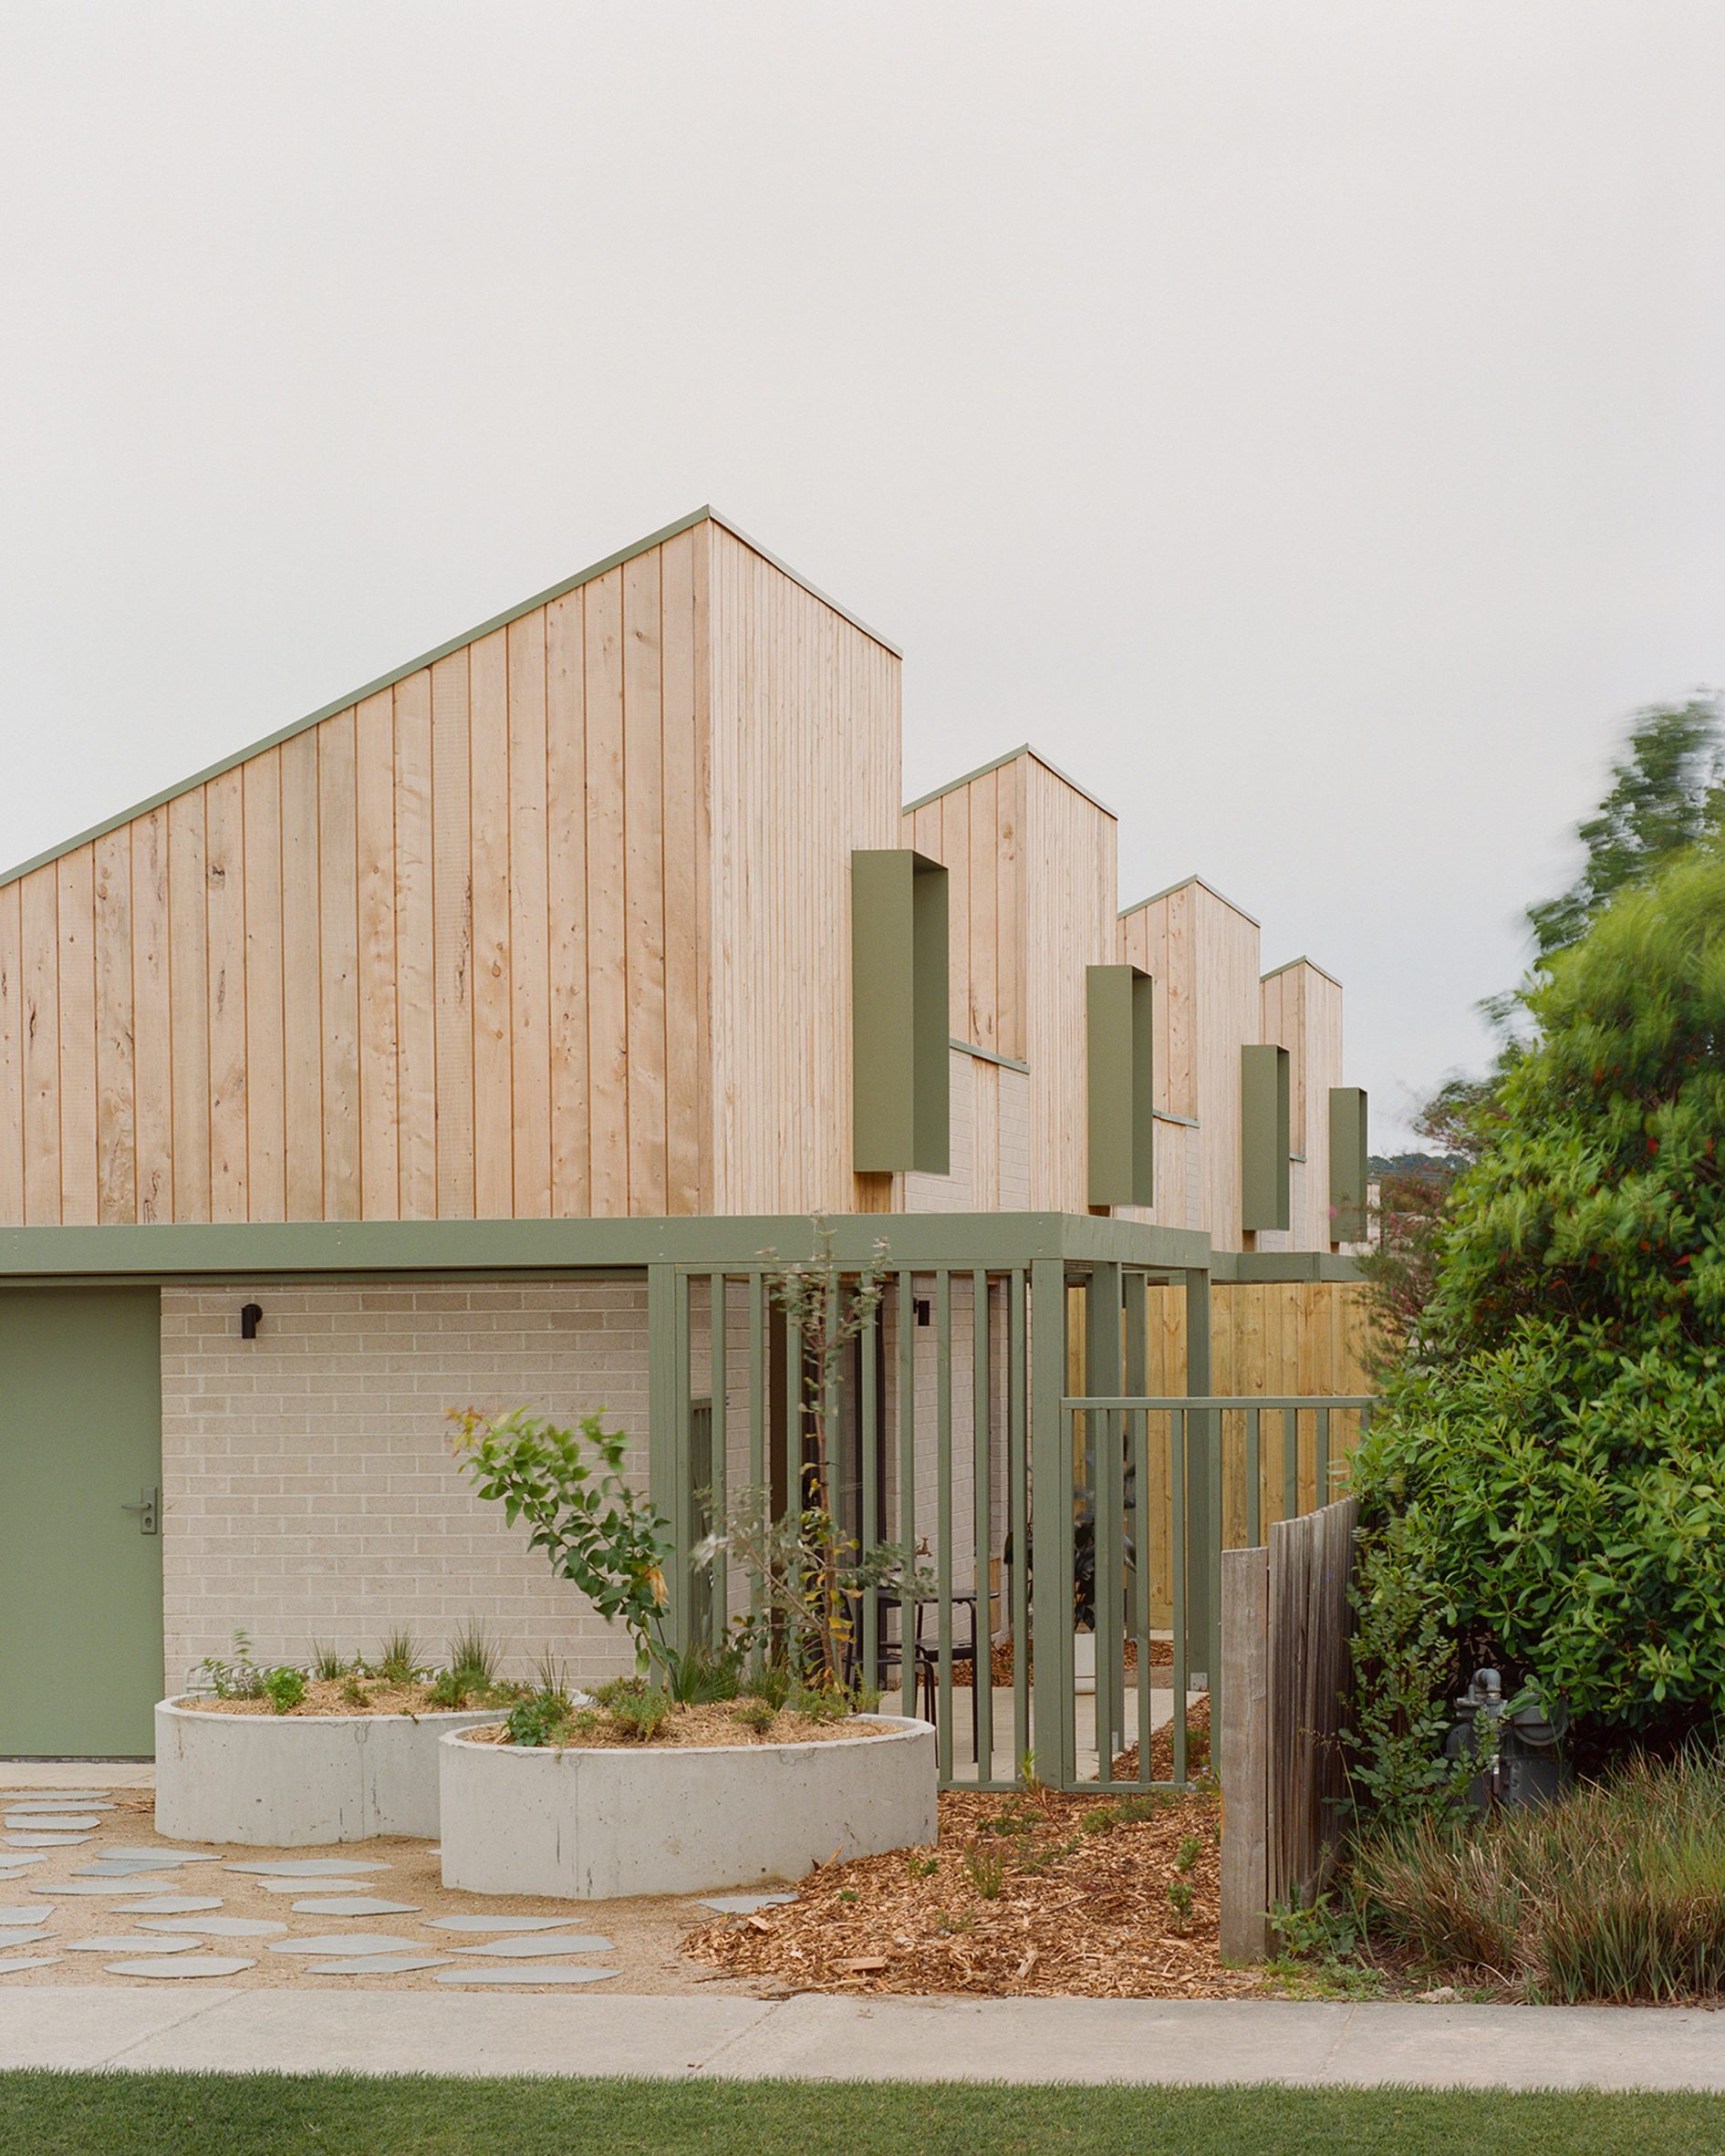 Exterior of Studio Bright's affordable housing project in Melbourne